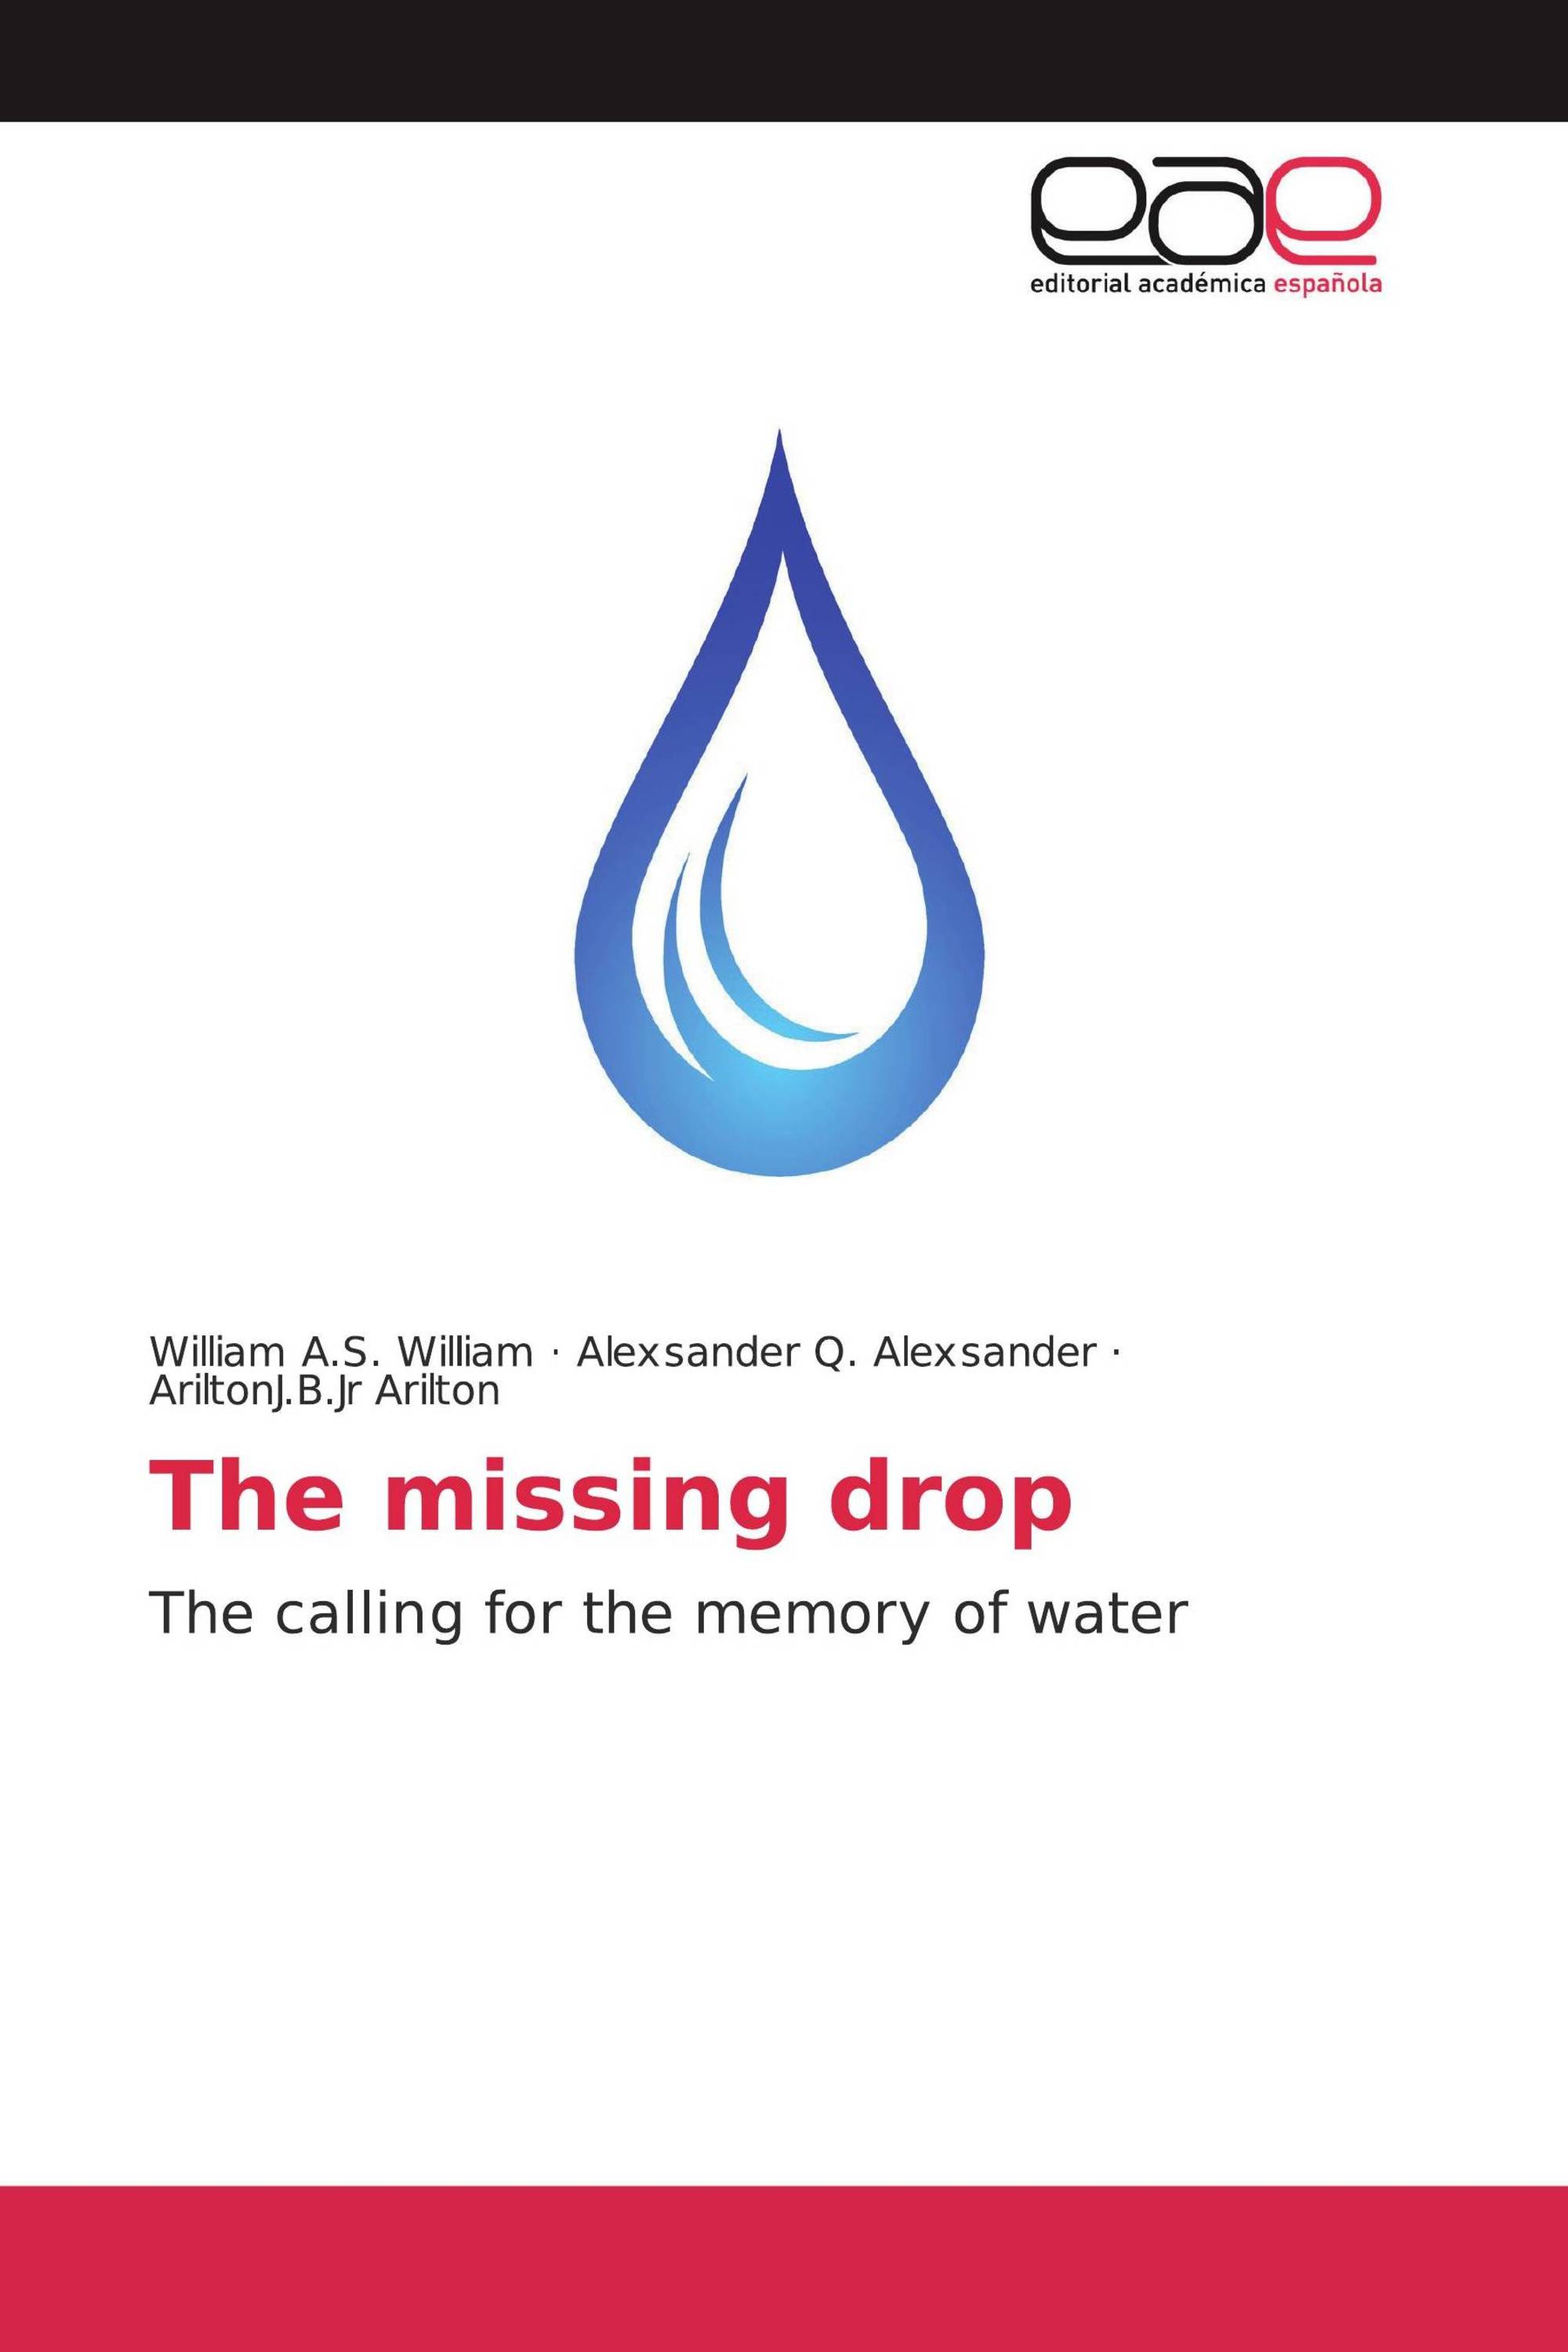 The missing drop